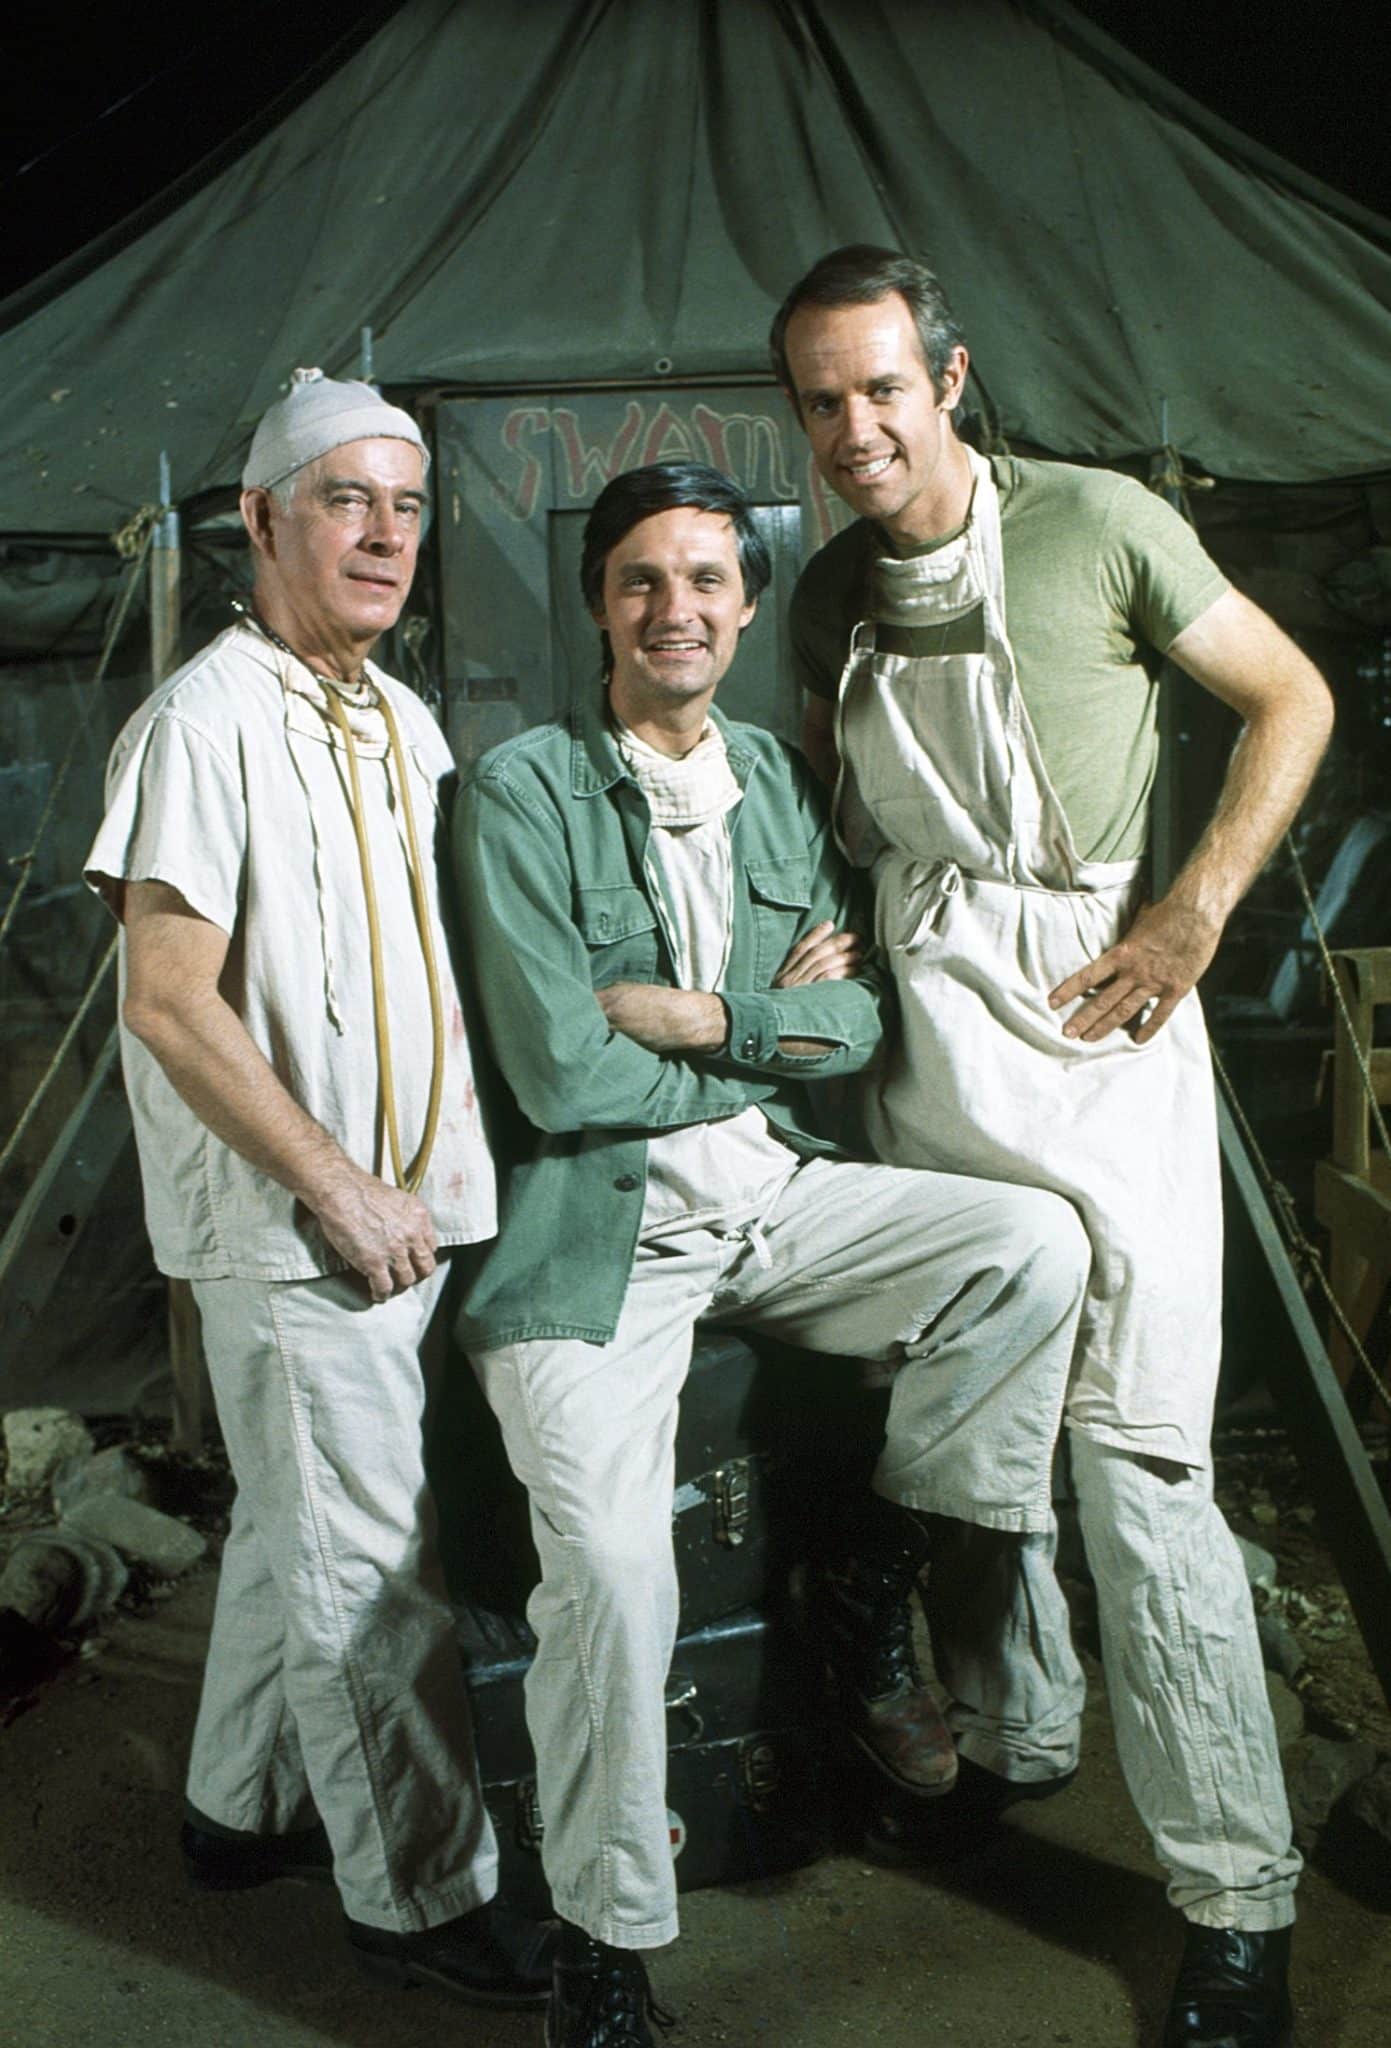 How To Watch Special 'M*A*S*H' 30th Anniversary Reunion